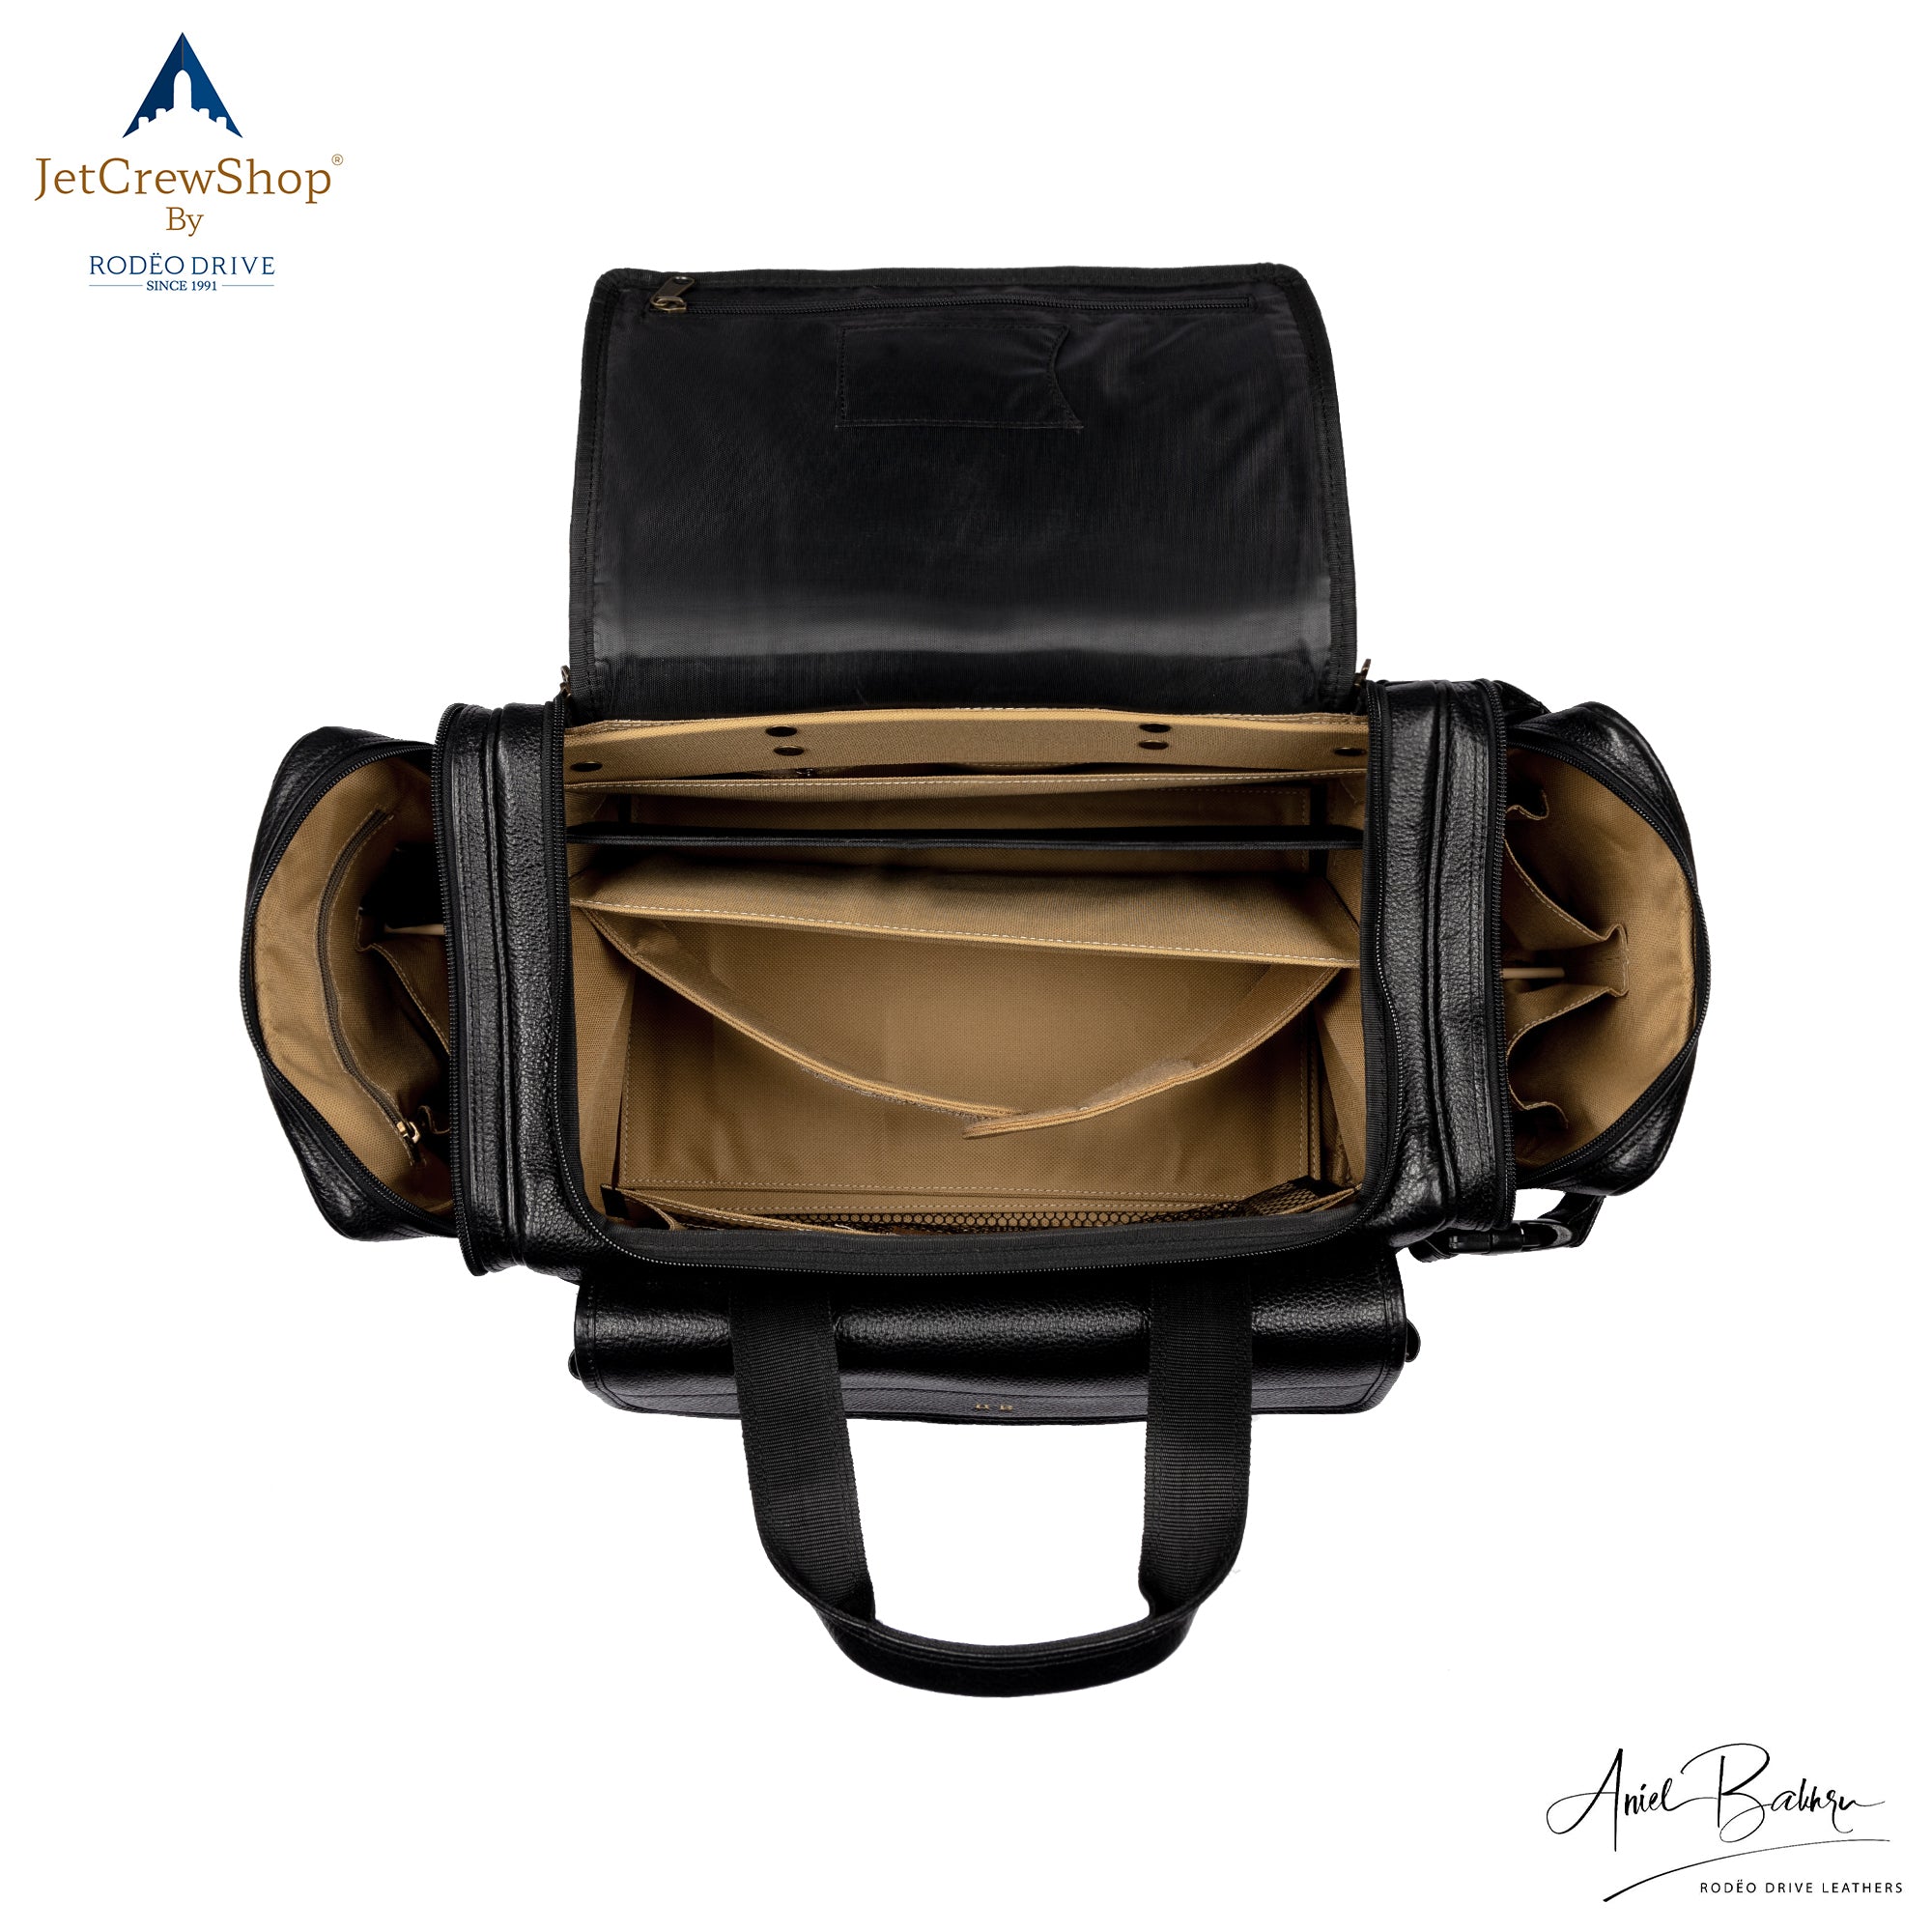 Image showcasing all the compartments of COMMUTER AIRSIDE PILOT BAG